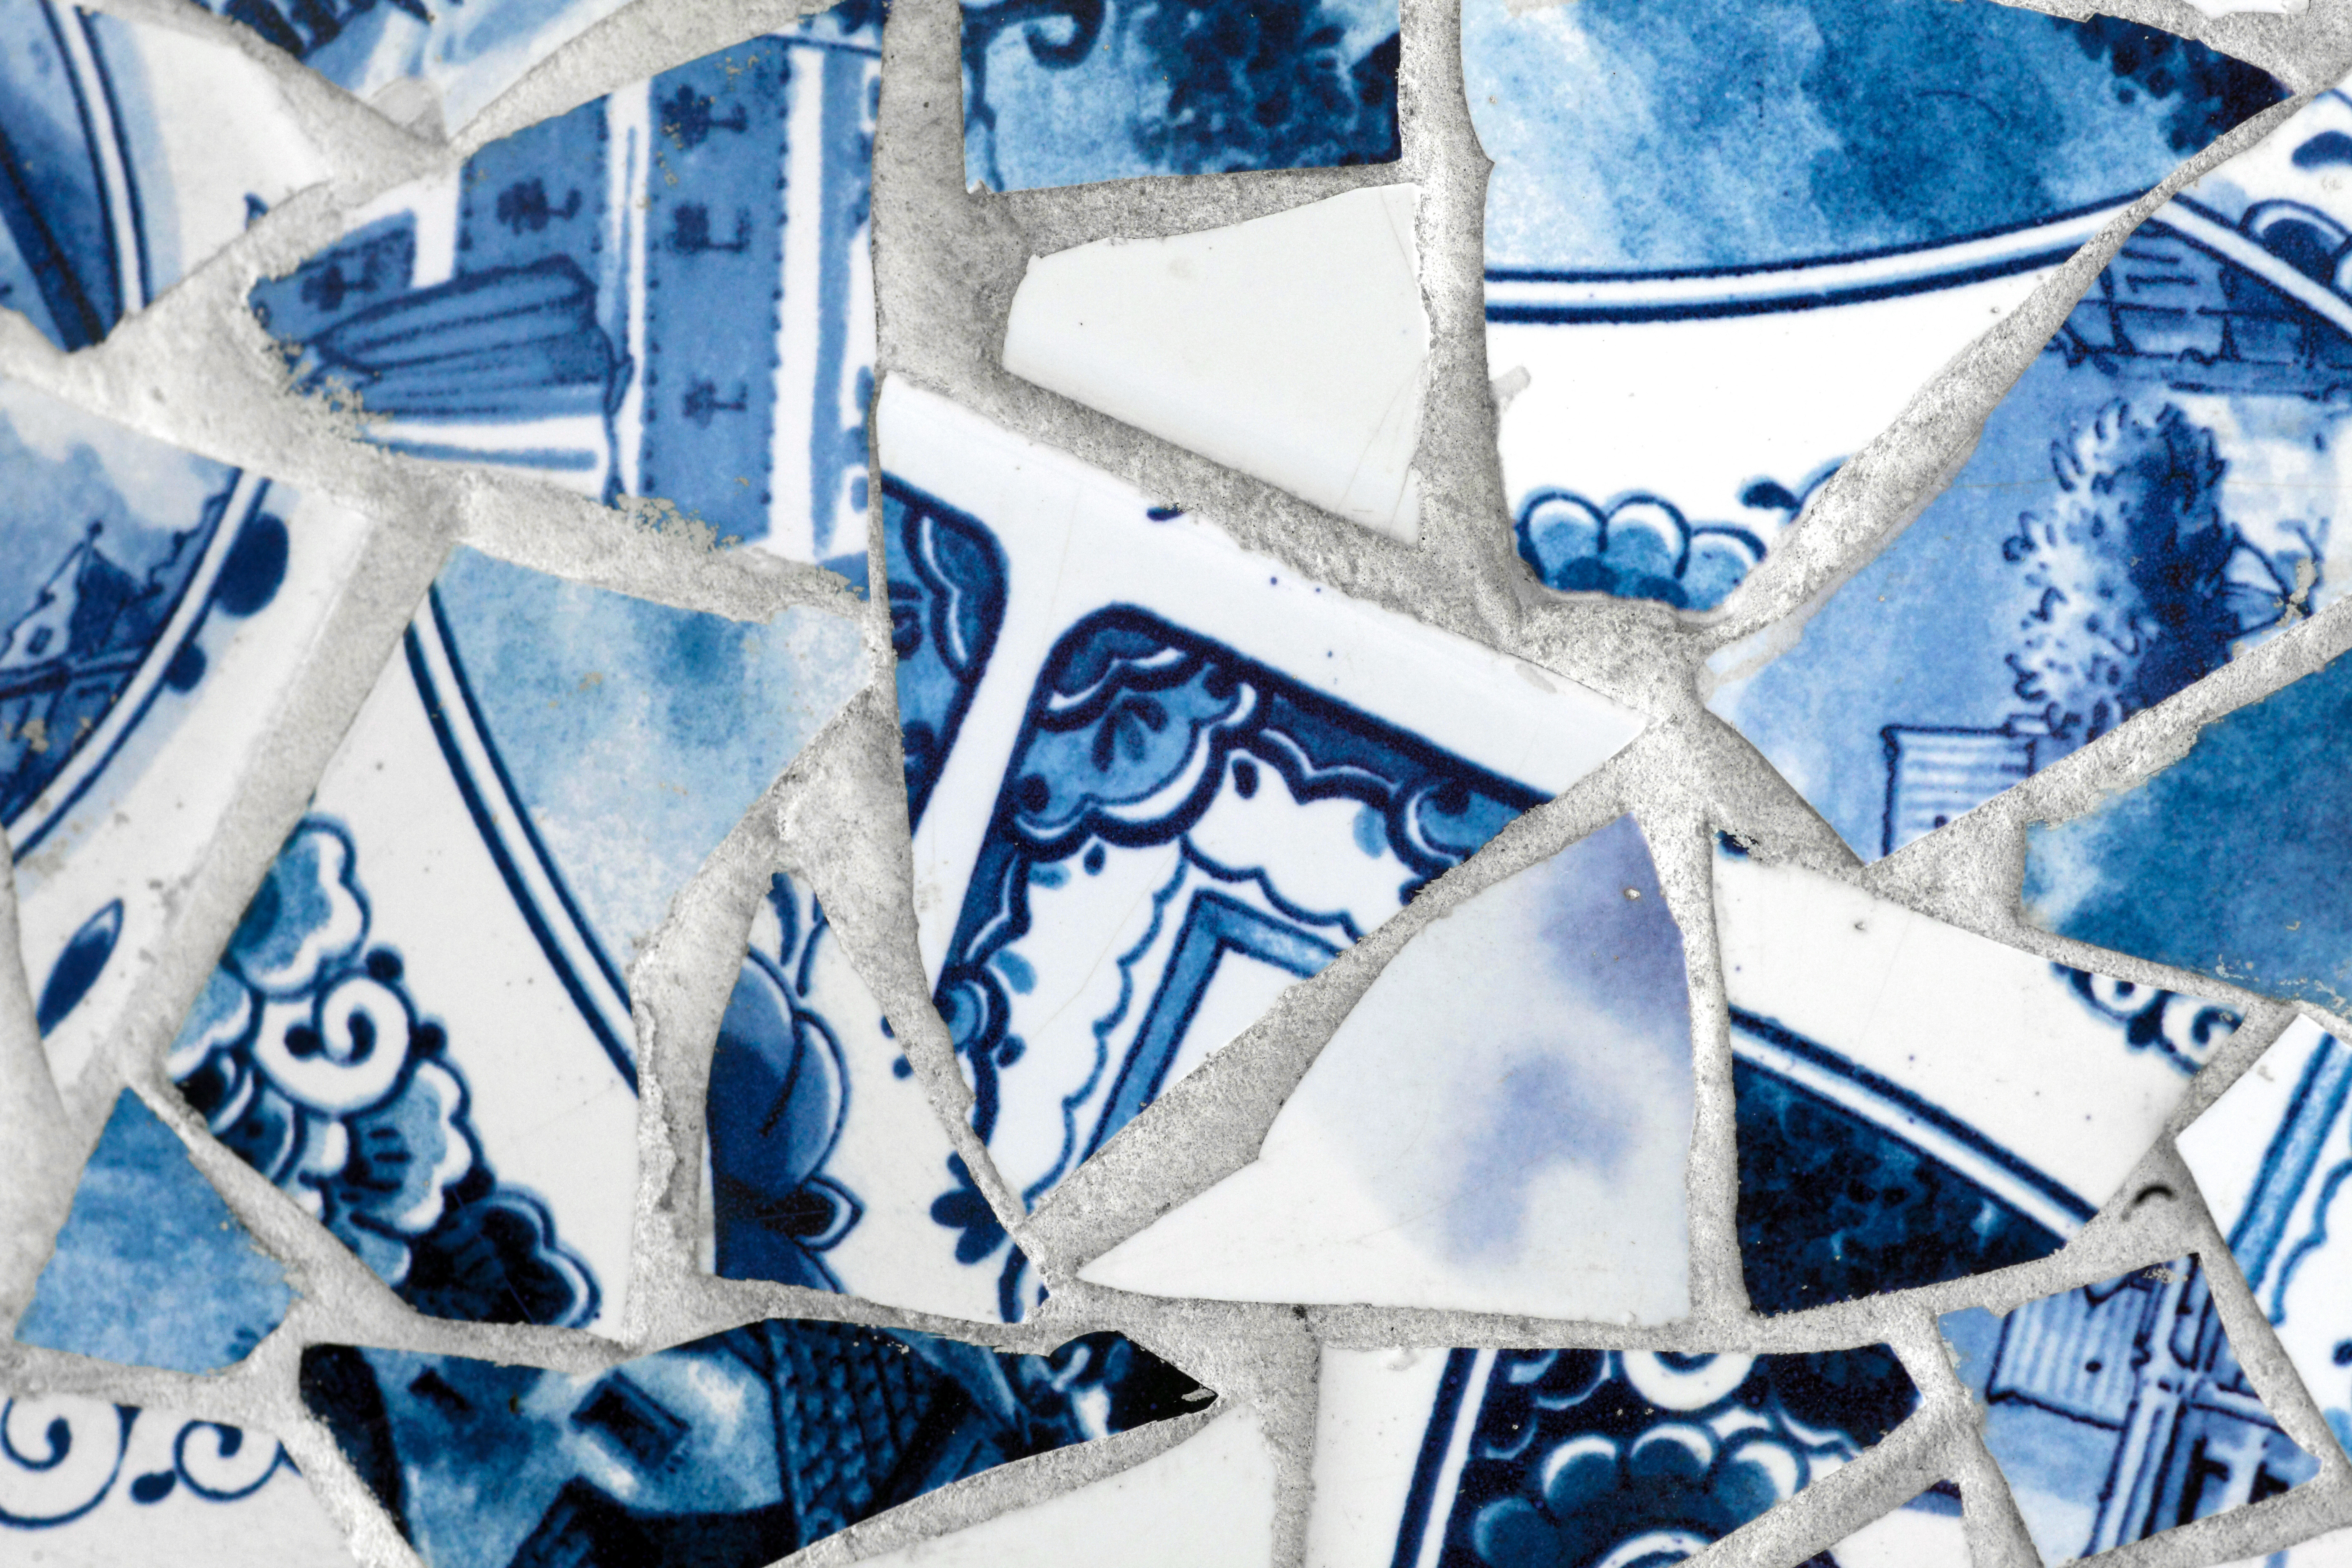 The fountain is shaped from fragments of Royal Blue Delft porcelain vases and tiles.